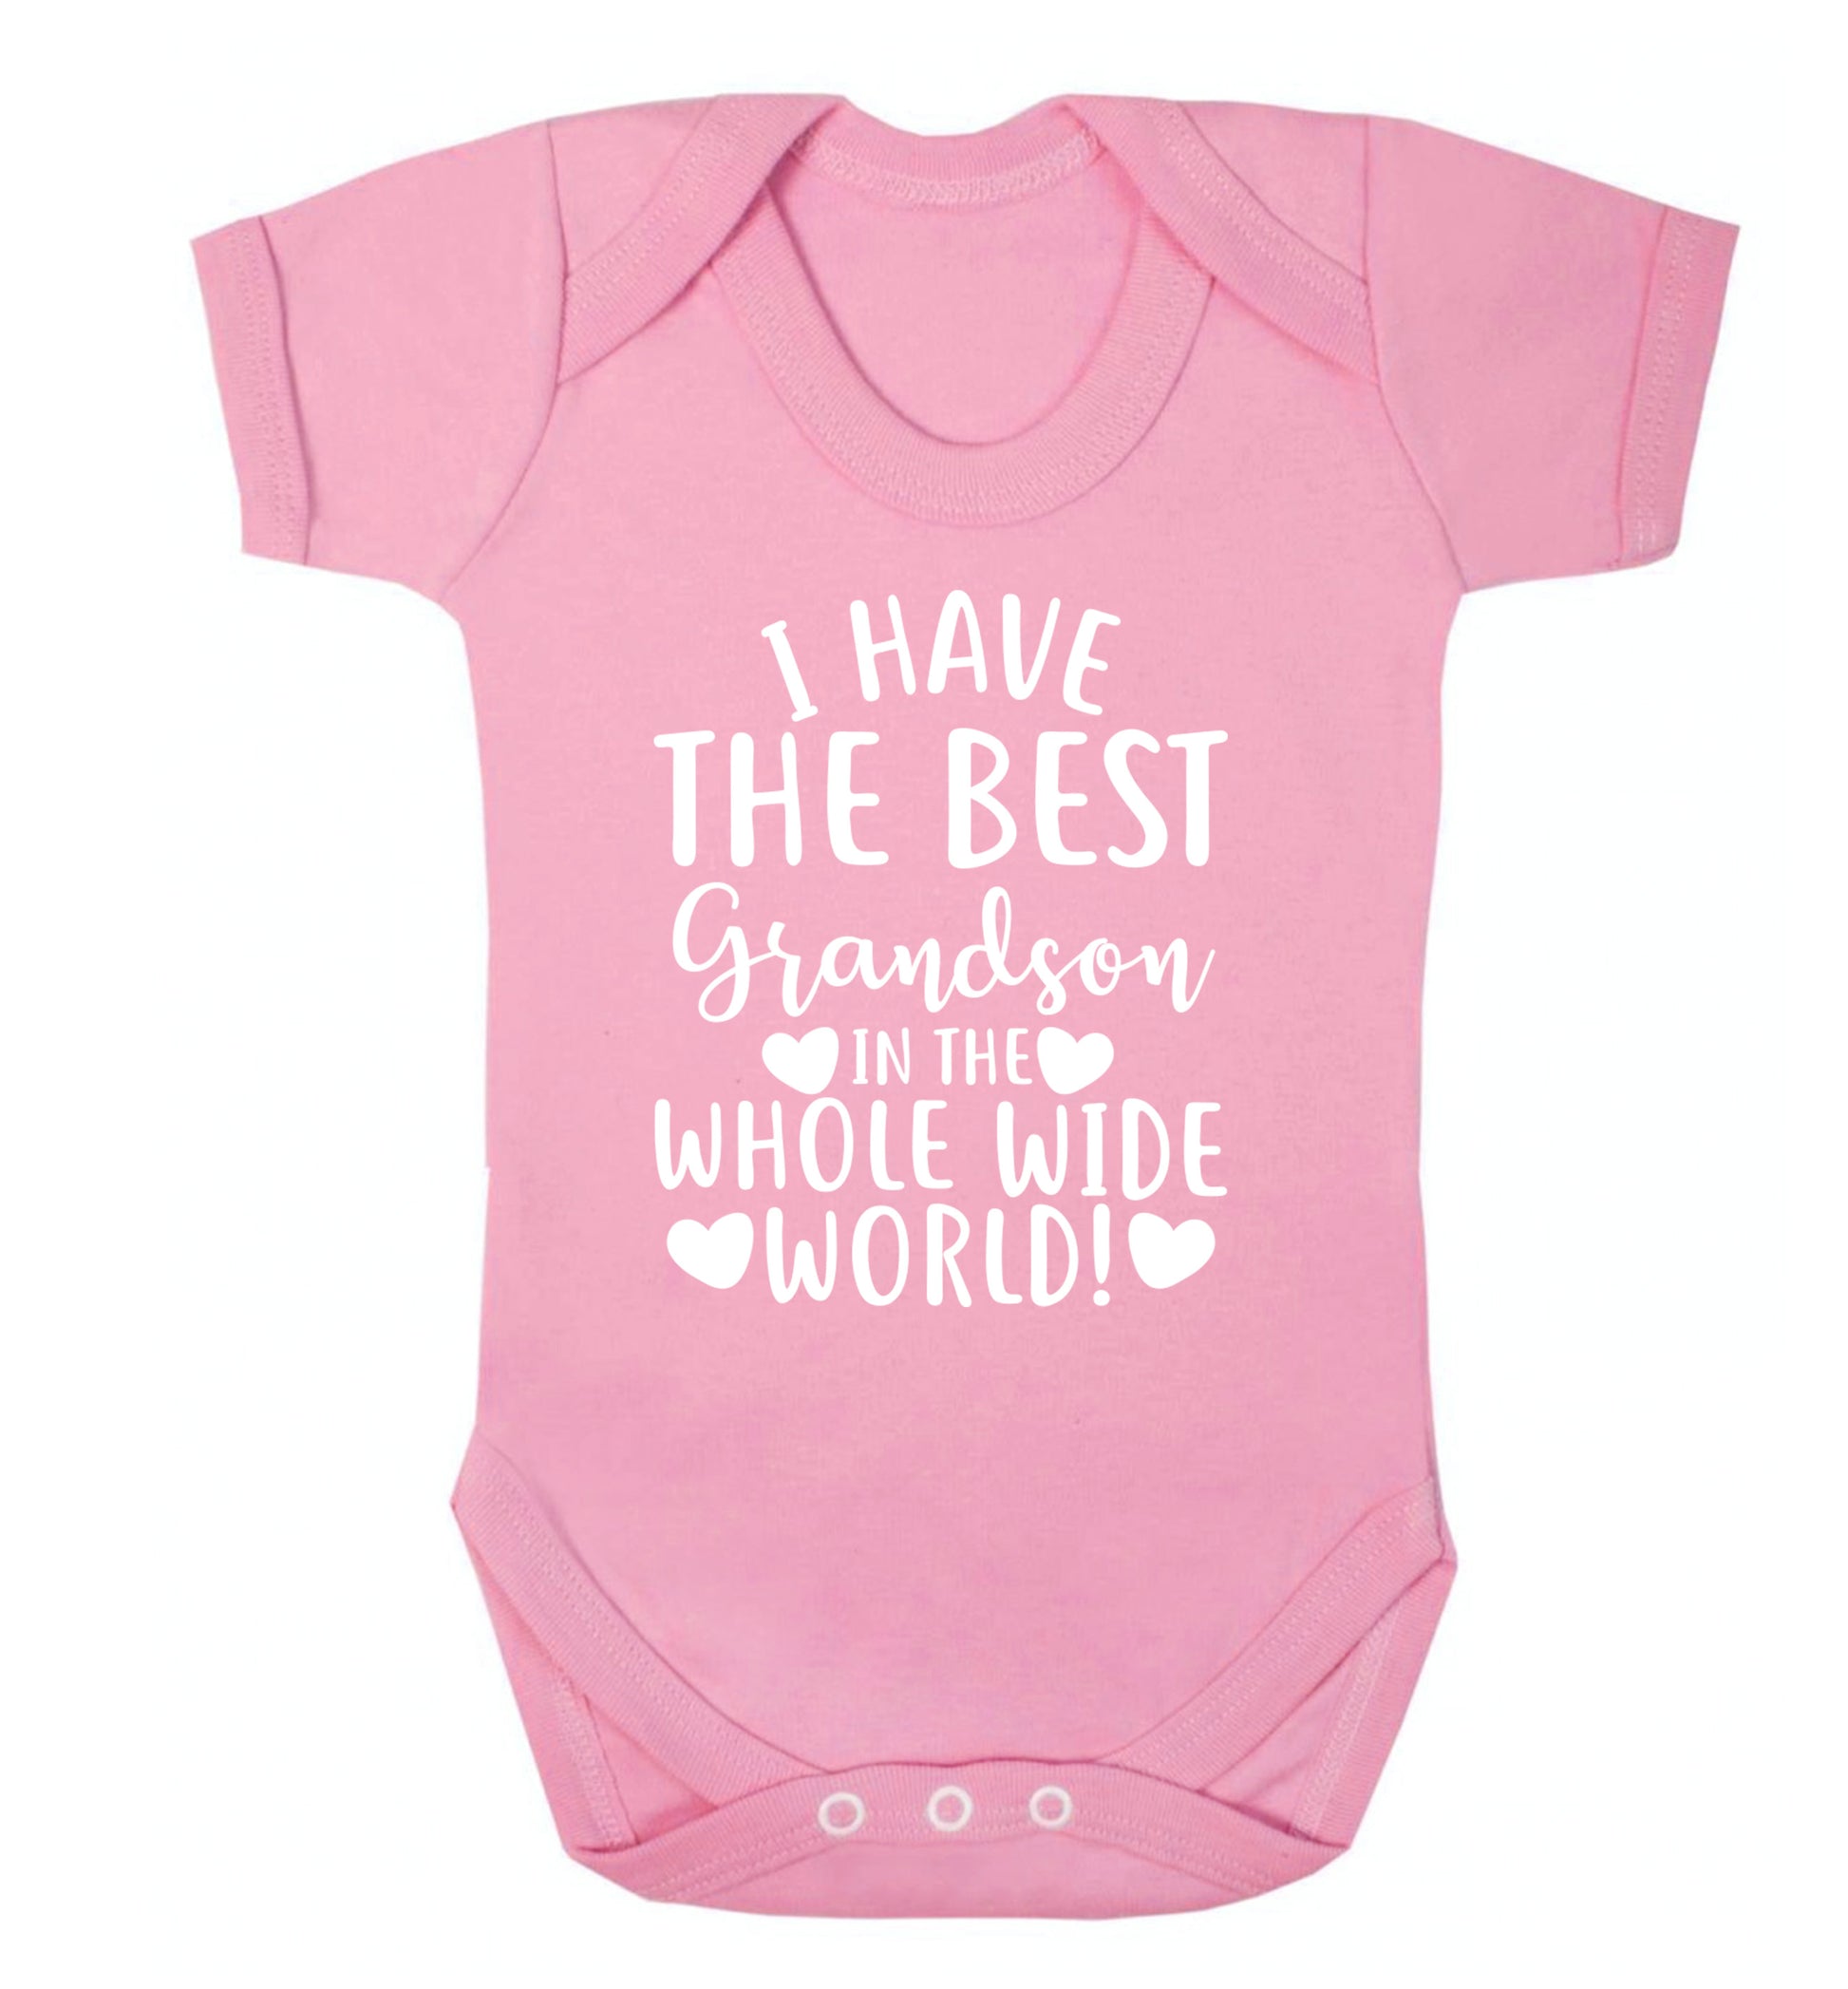 I have the best grandson in the whole wide world! Baby Vest pale pink 18-24 months